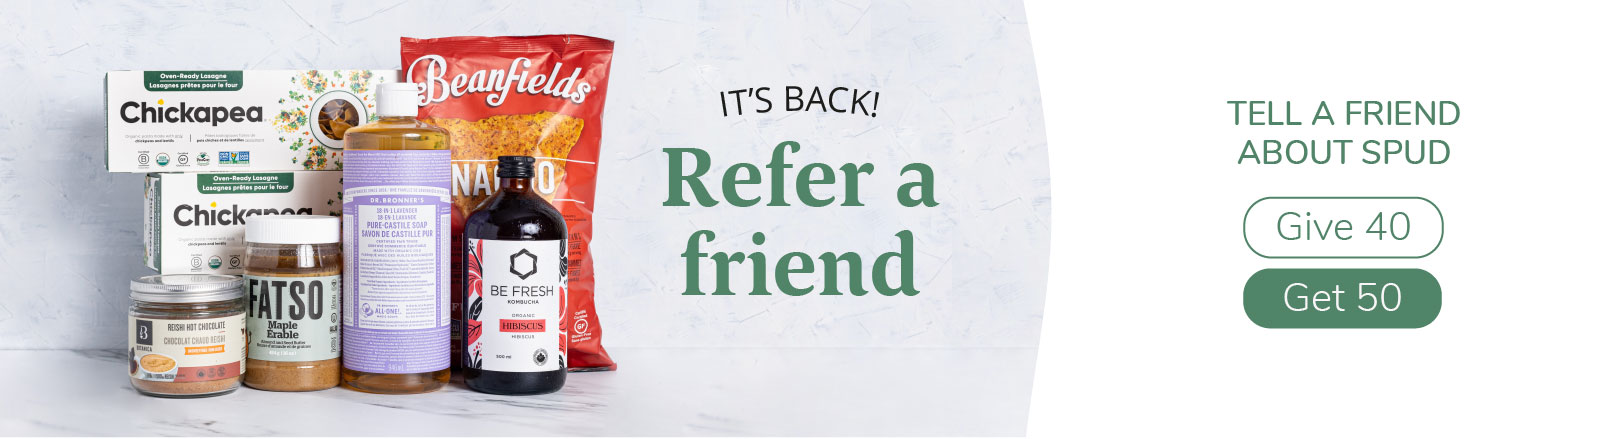 Refer a friend and get $50 